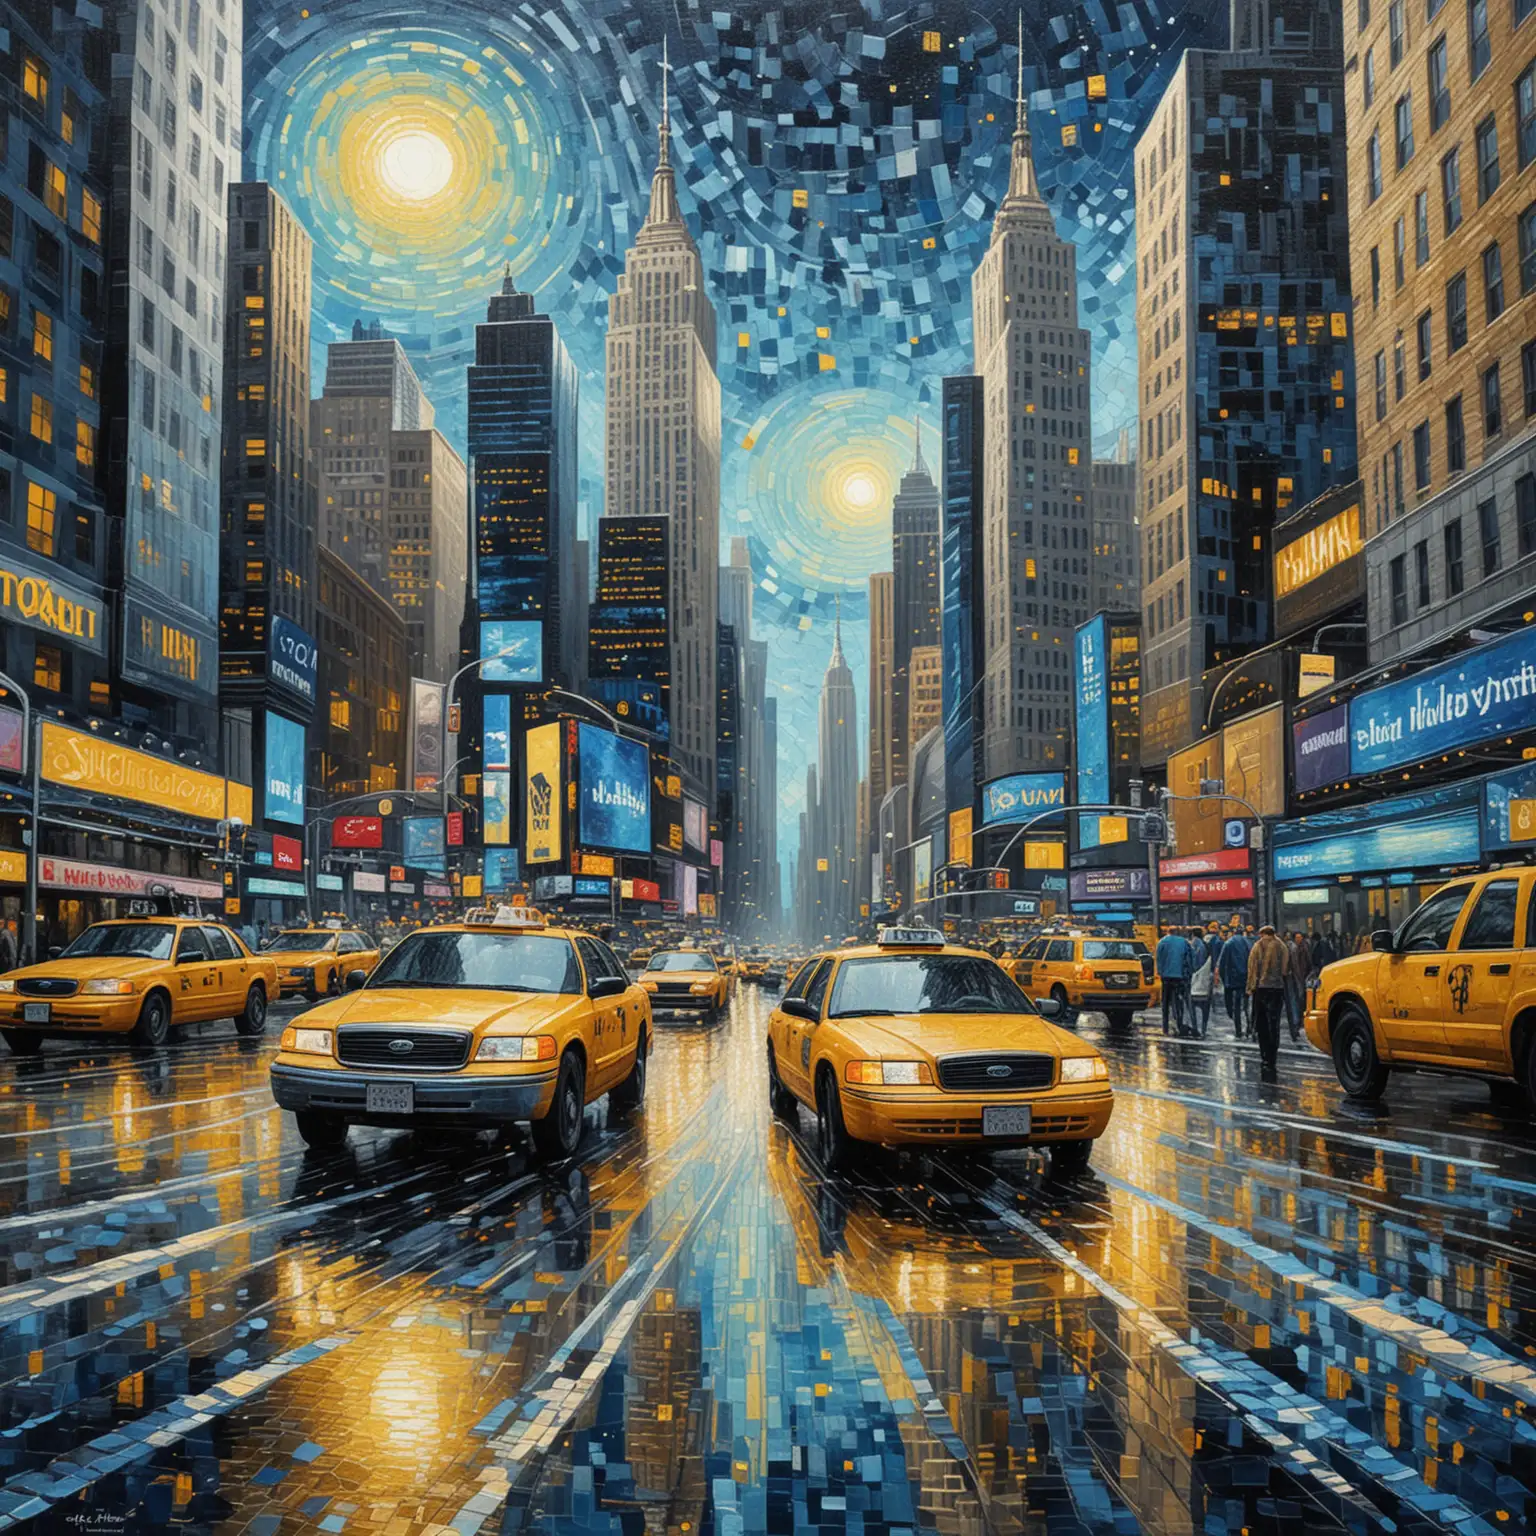 A painting of a beautiful mosaic of new york cityscape, including the time squre and yellow cabs, with swirling patterns resembling Van Gogh’s Starry Night. The background is an intricate pattern in shades of blue and gold, creating a dreamy atmosphere. This artwork combines elements from both art styles to create a unique piece that captures attention., painting, vibrant